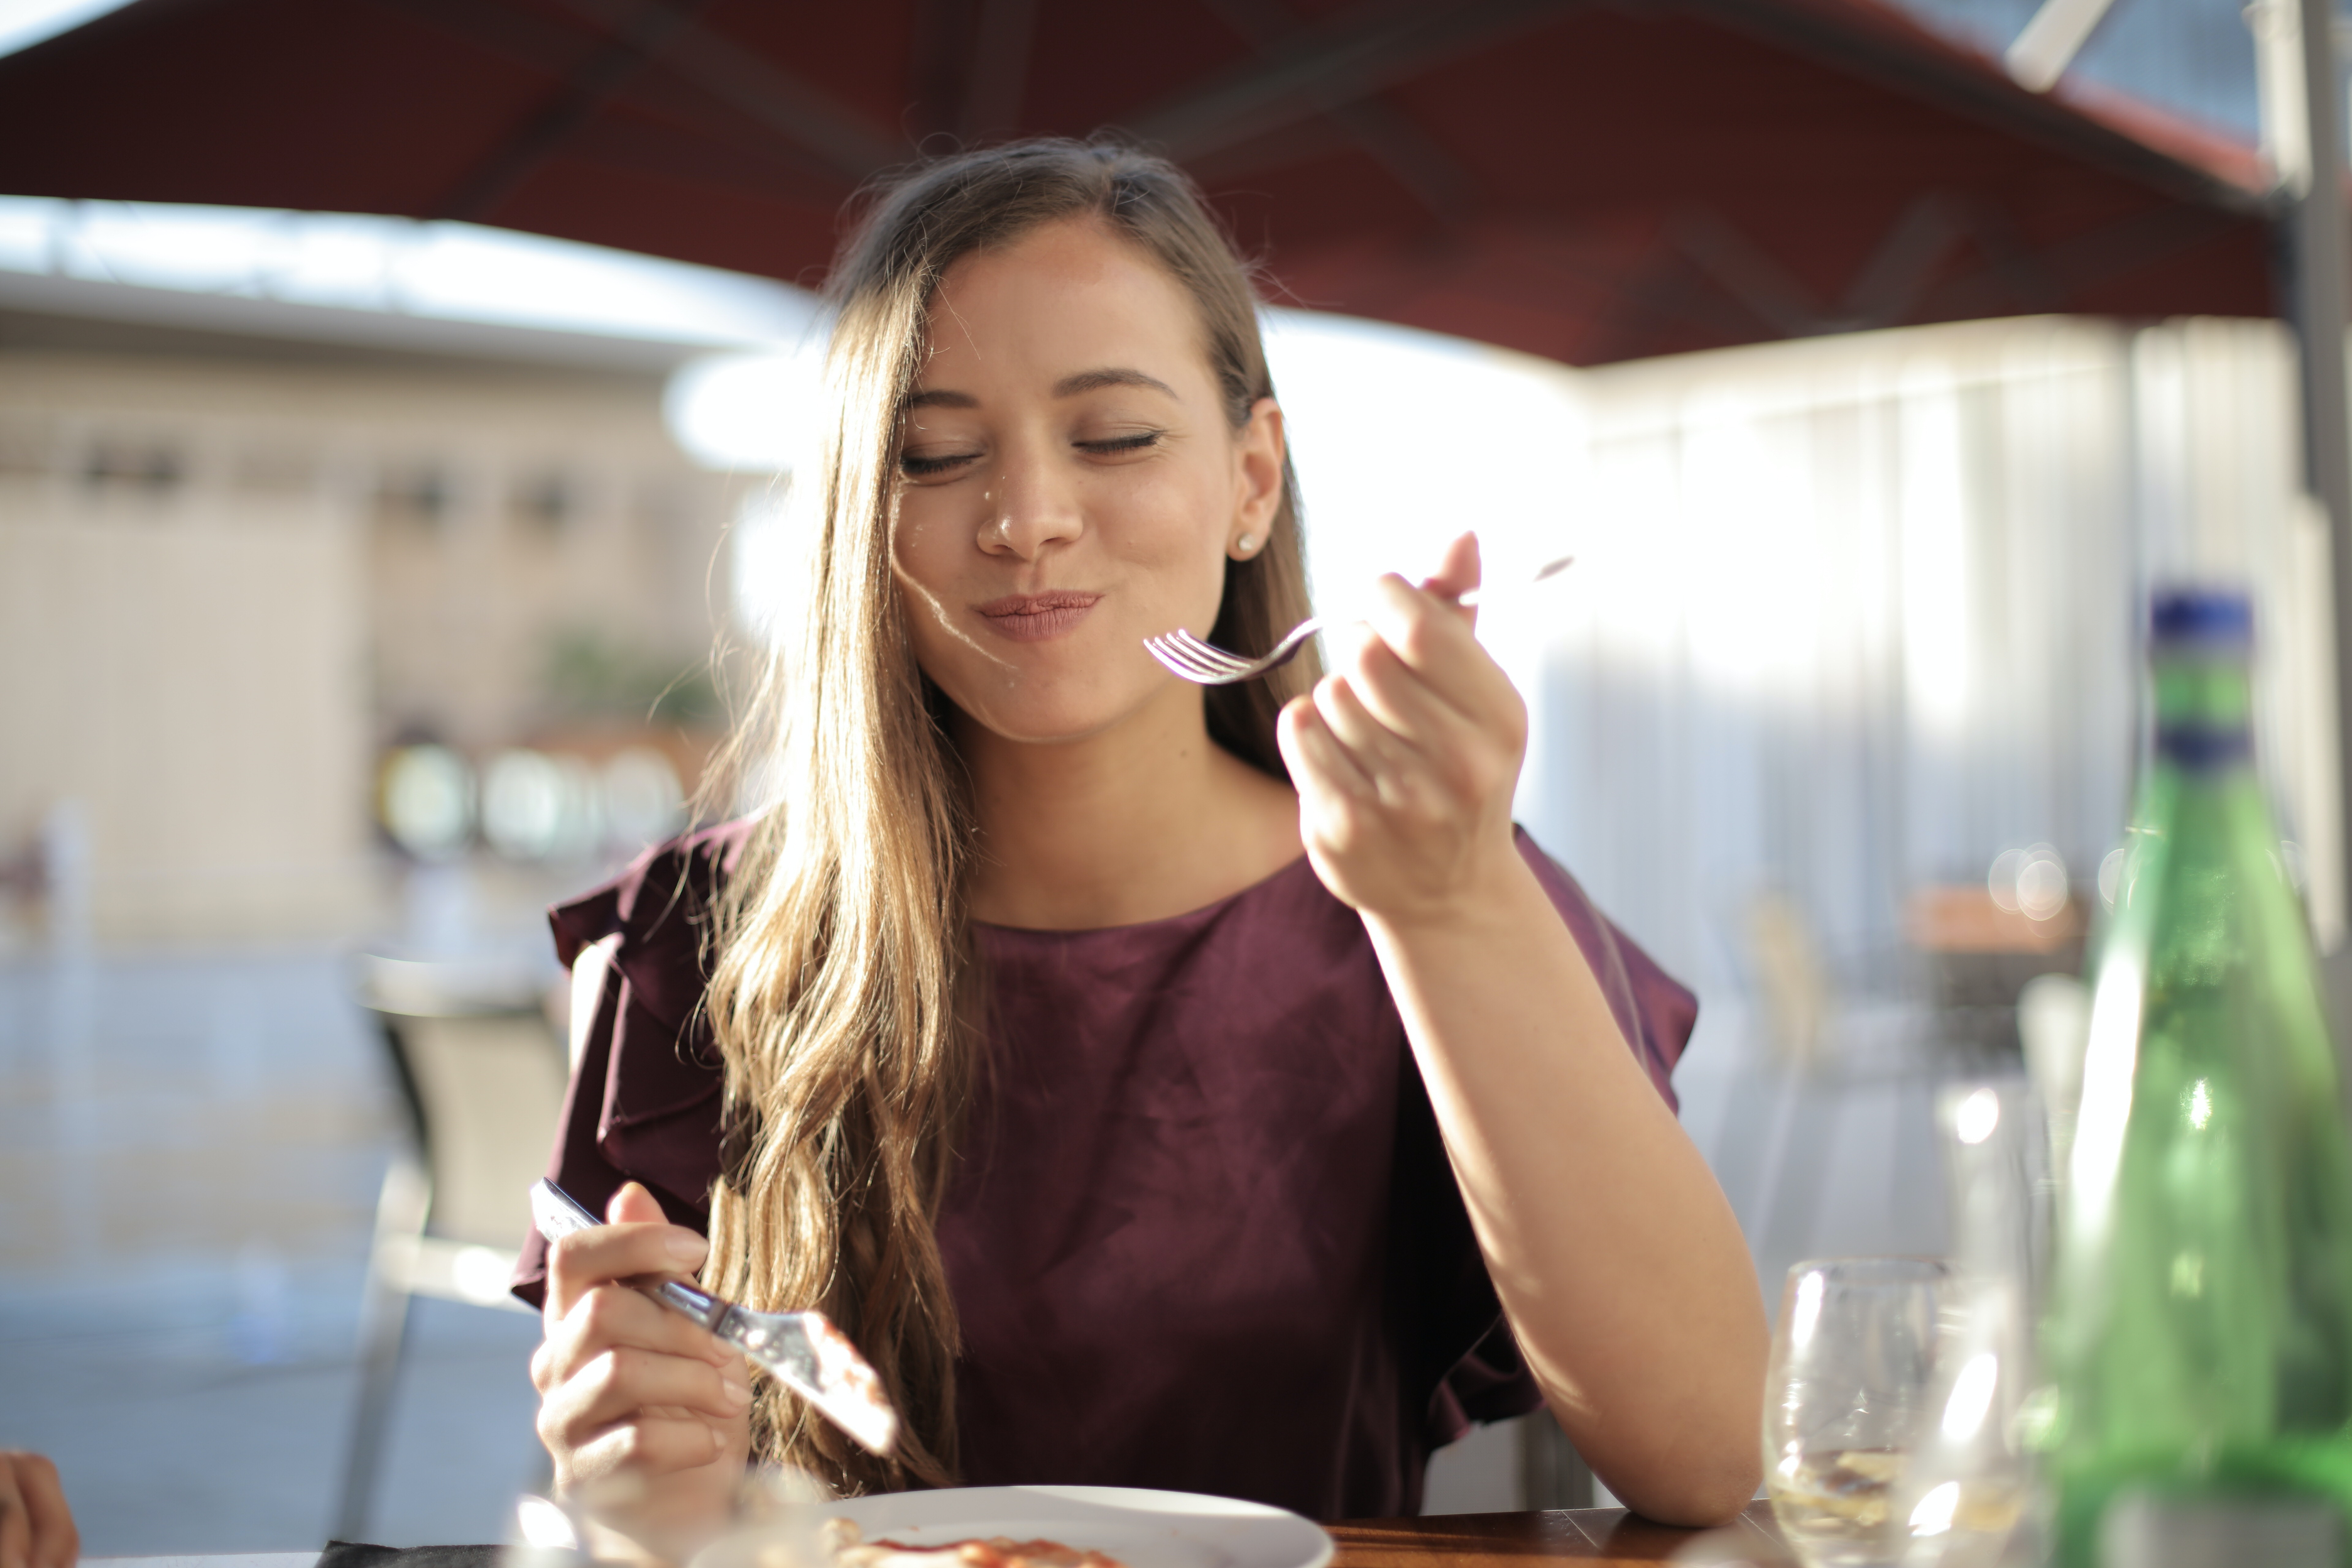 woman eating a meal outside and smiling